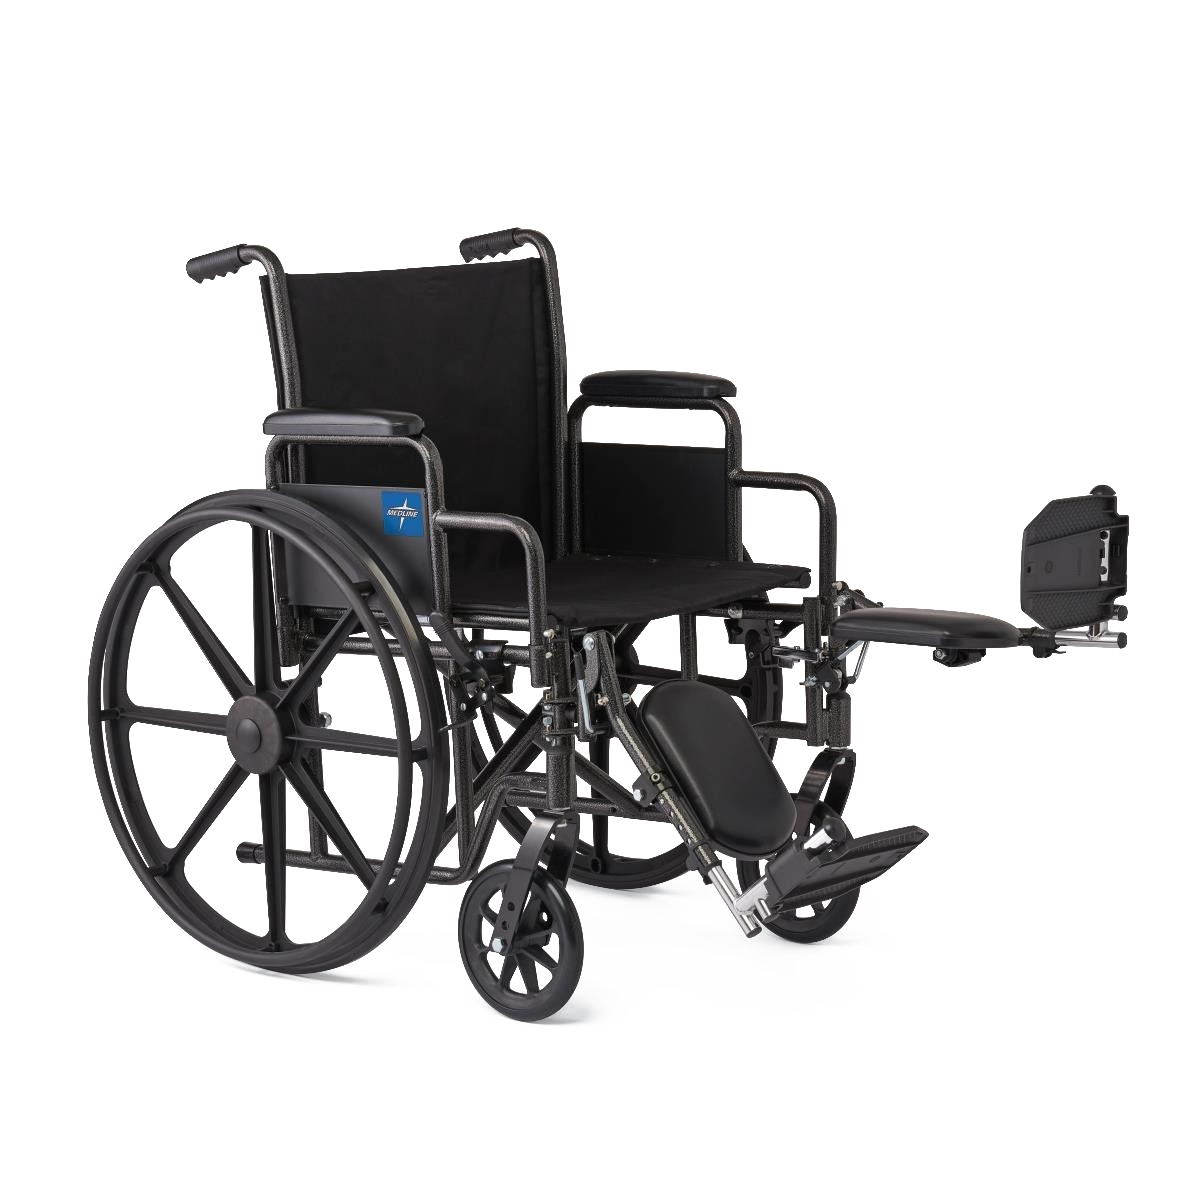 Orlando Mobility Scooters provides rental scooter services, rental wheelchair, rental walker, and rental stroller services, along with retail sales for scooters and accessories. We serve the Orlando, Florida Area.